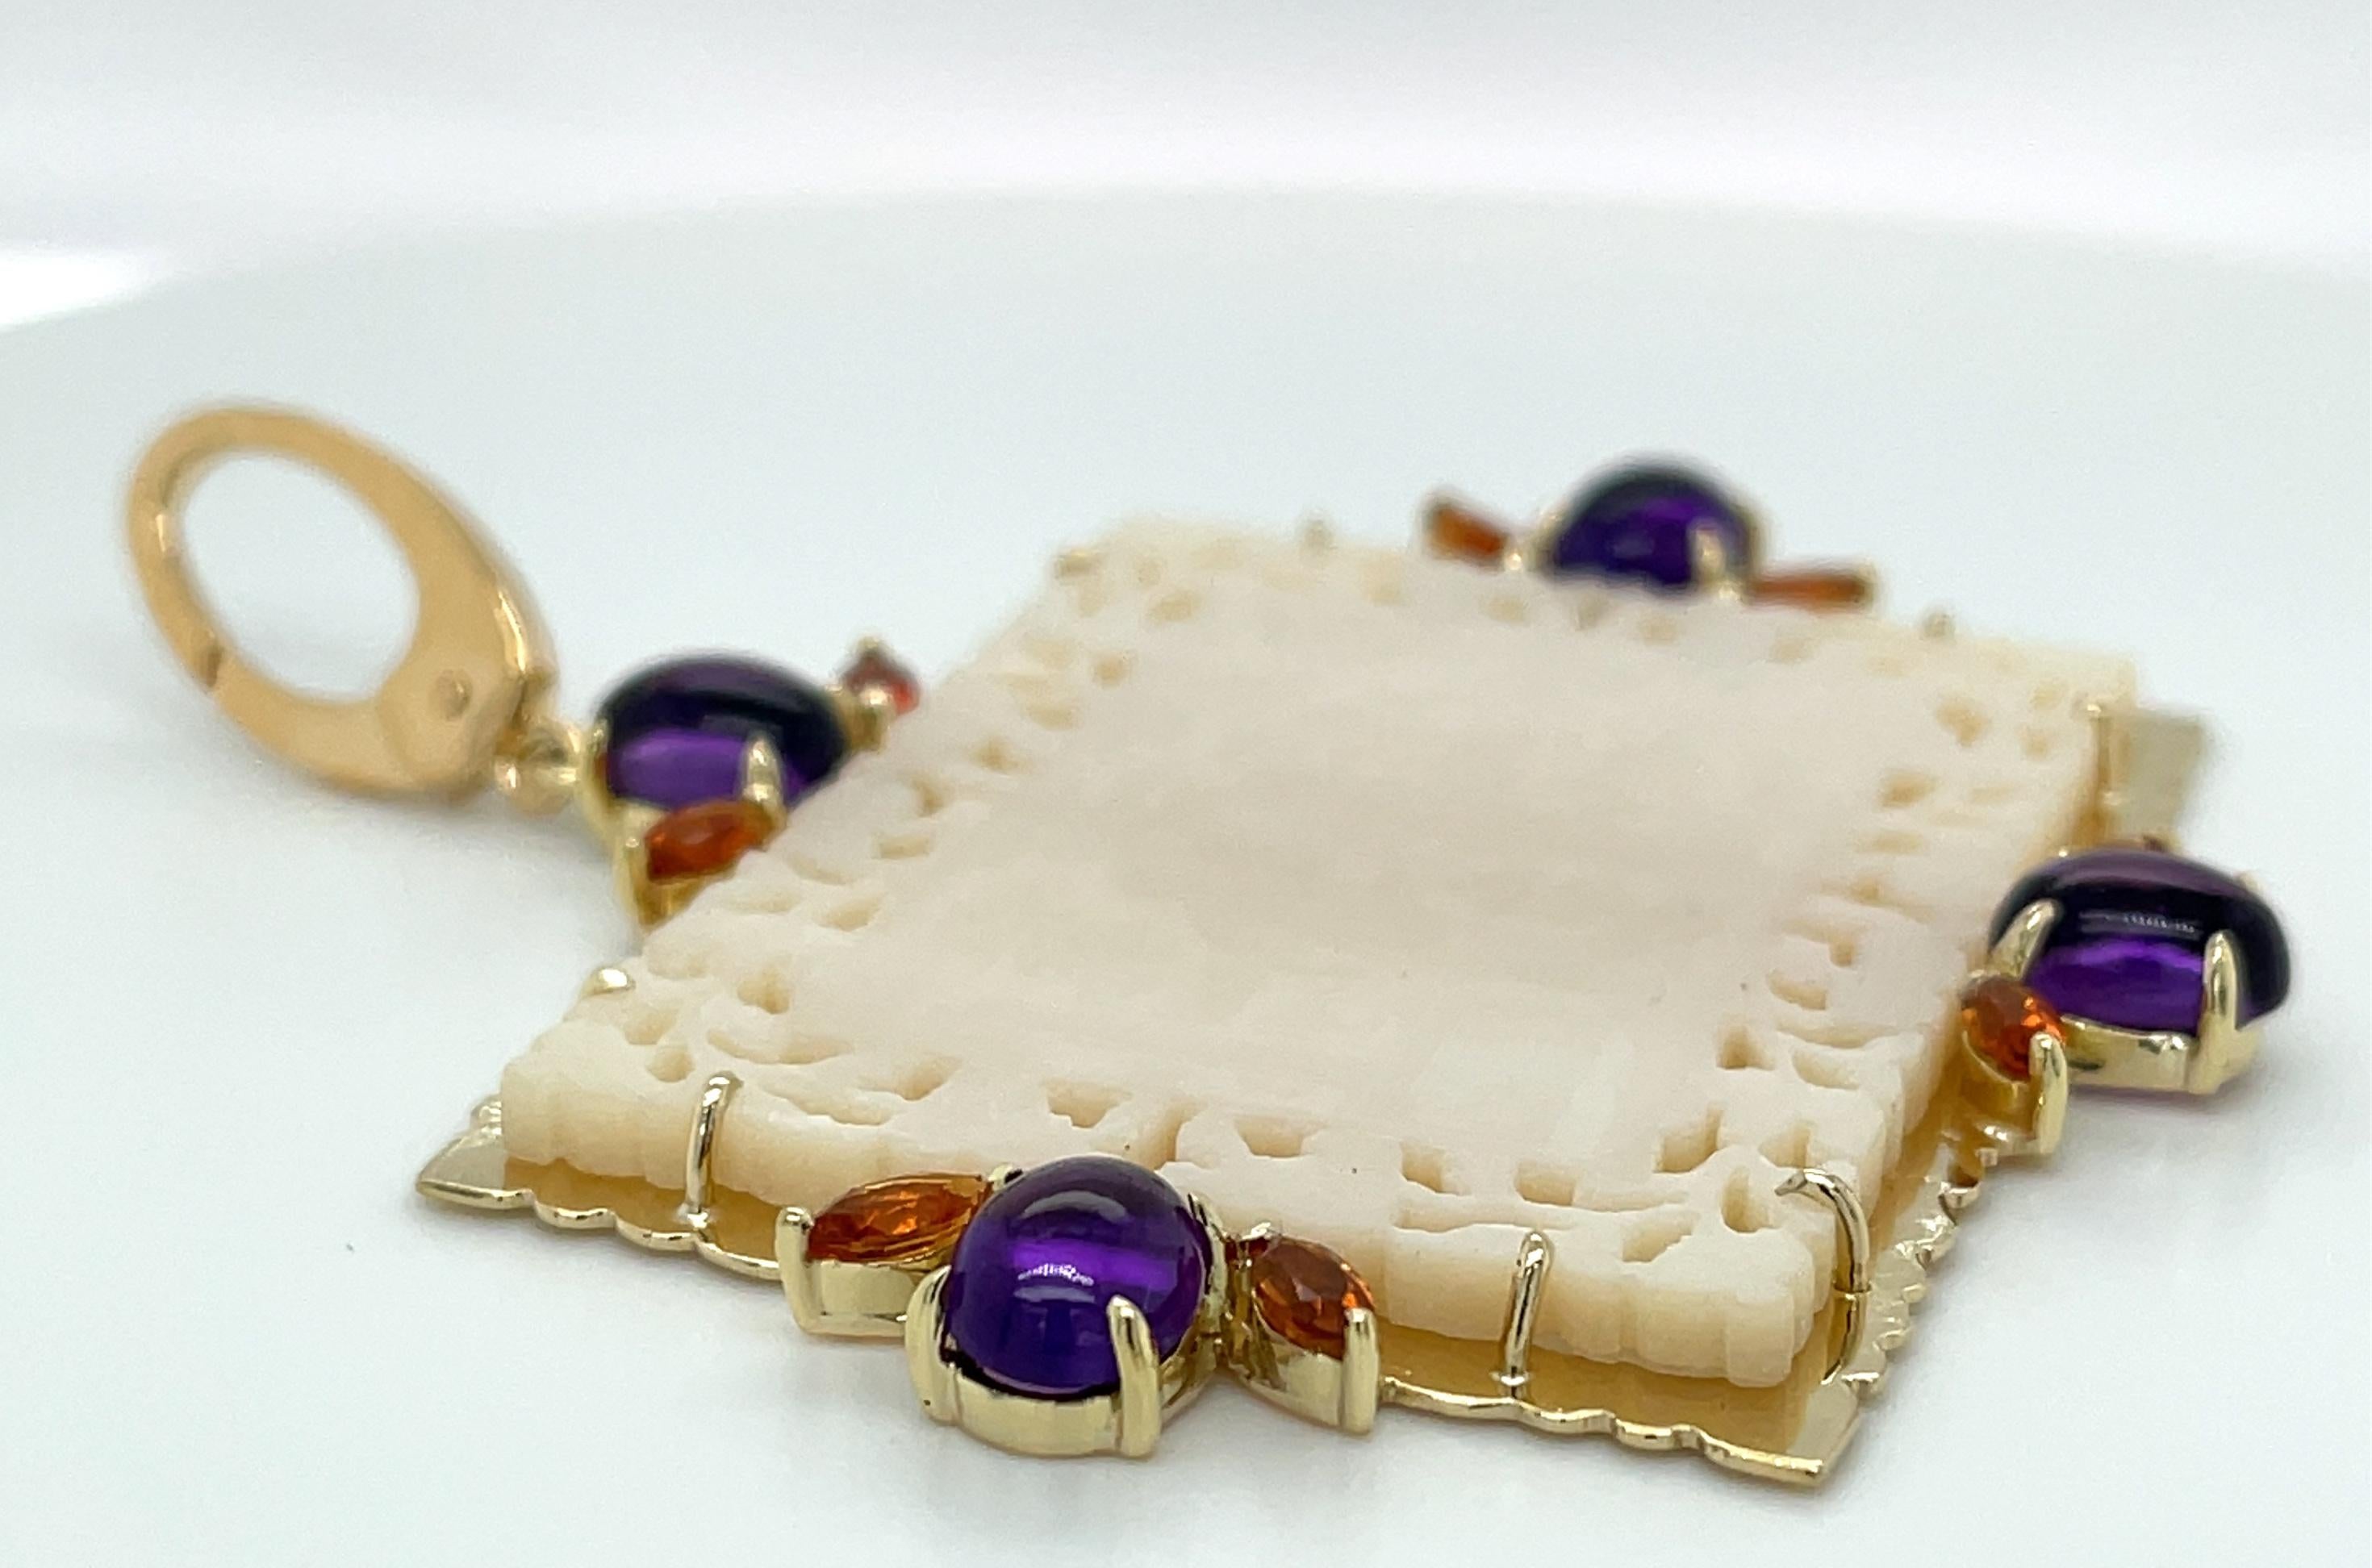 This stunning pendant features a beautifully fretted antique mother-of-pearl gambling counter set in precious 18k yellow gold with rich purple amethyst cabochons and brilliant Madeira colored citrines. Gambling counters, or gaming chips as they were